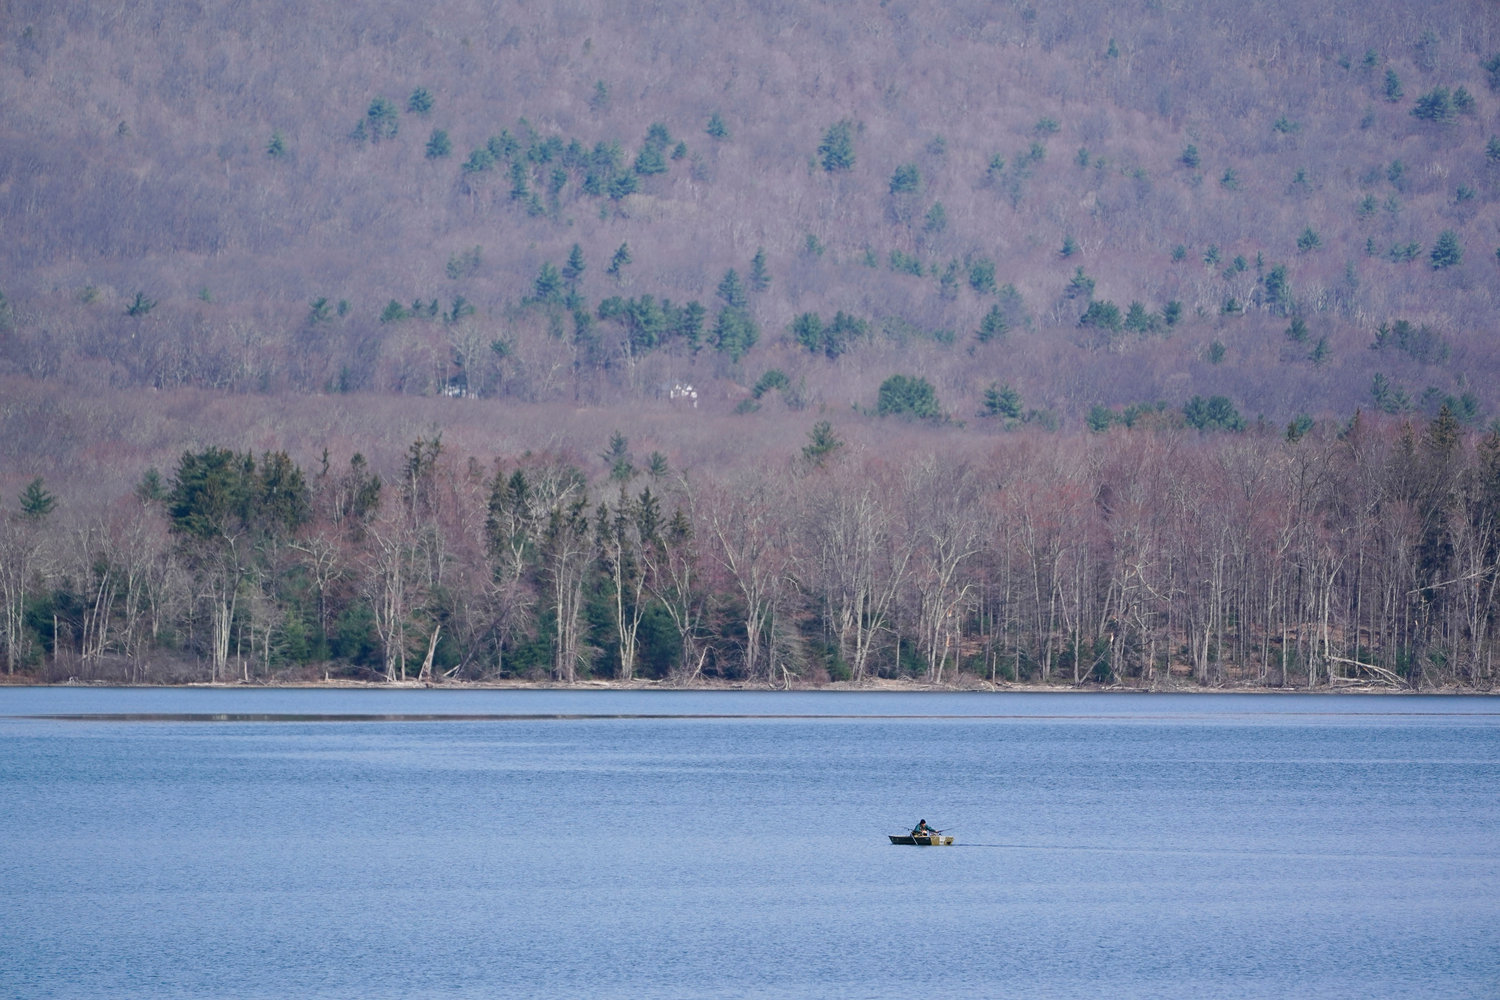 A rowboat makes its way on the surface of the Ashokan Reservoir in Olive, N.Y., Tuesday, April 5, 2022. As western regions contend with drier conditions, New York City is under fire for sometimes releasing hundreds of millions of gallons of water a day from the reservoir in the Catskill Mountains. The occasional releases, often around storms, have been used to manage water the reservoir's  levels and to keep the water clear. But residents downstream say the periodic surges cause ecological harm along the lower Esopus Creek. (AP Photo/Seth Wenig)